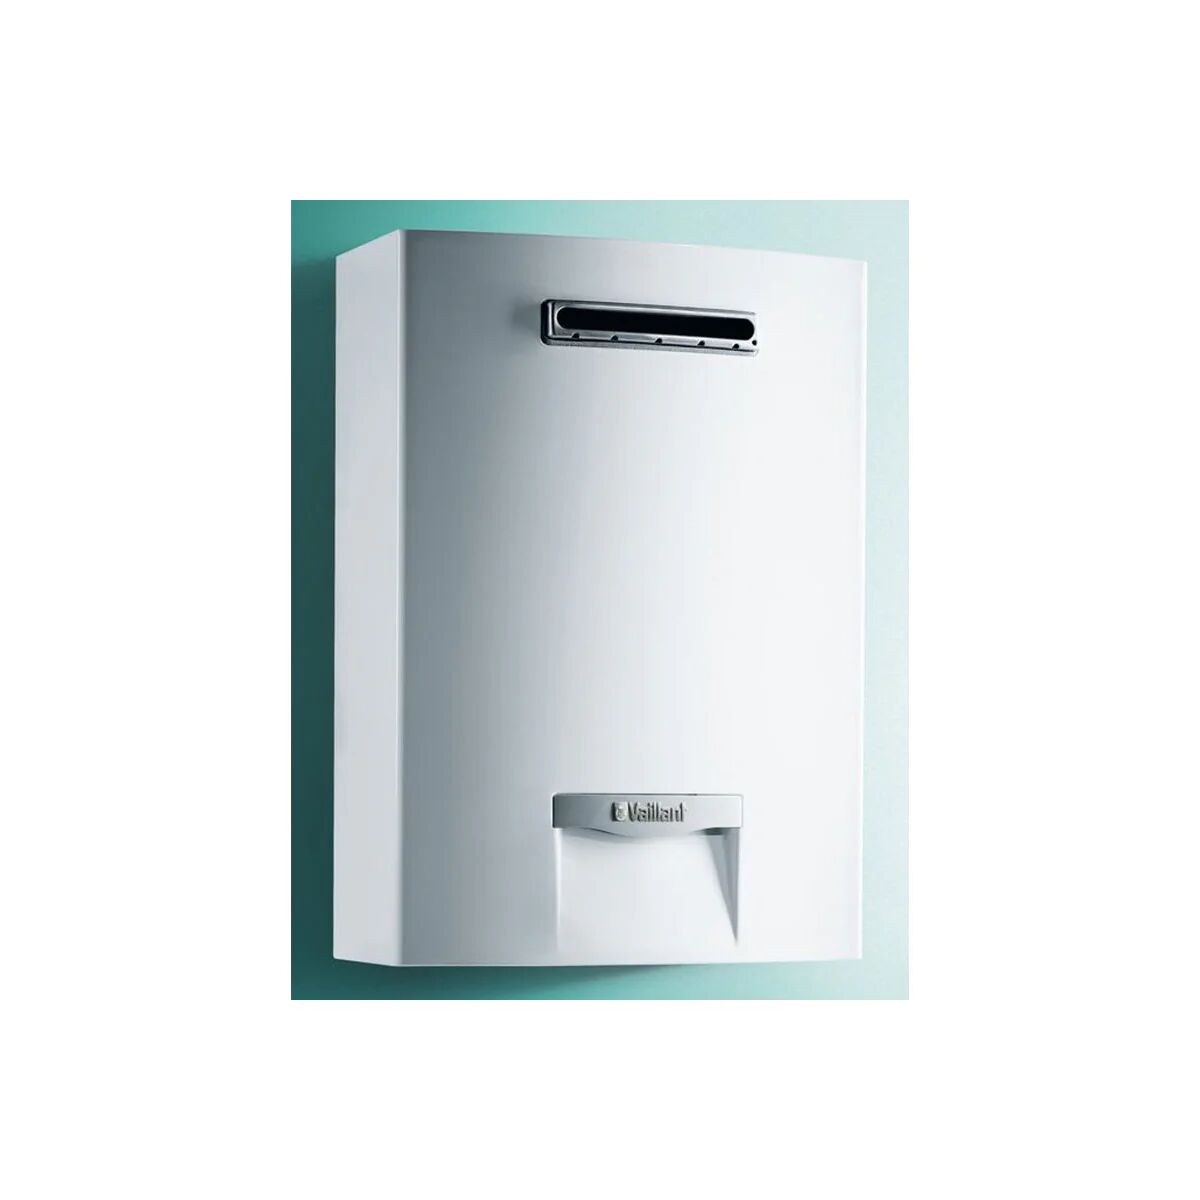 Scaldabagno Vaillant Outsidemag 128/1-5 Camera Stagna 12 Lt Low Nox Metano A (10022465)